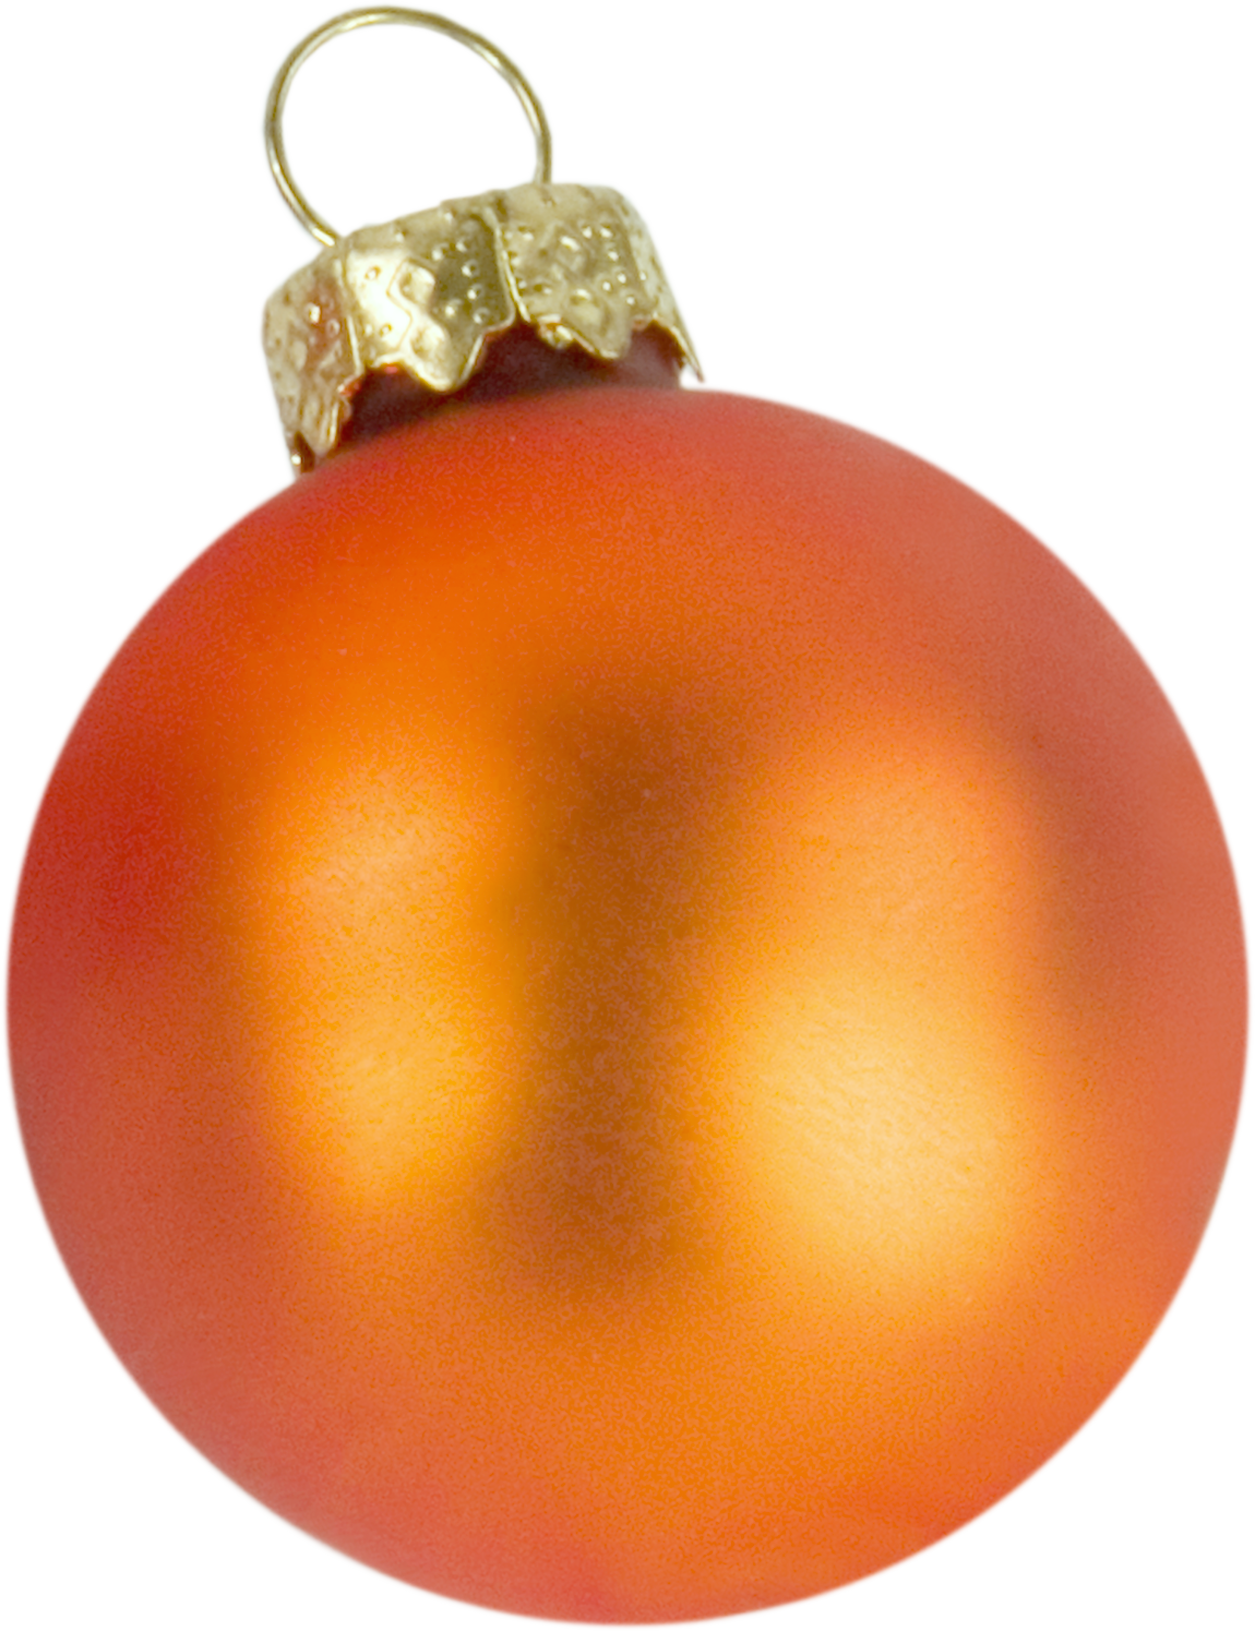 Christmas ornament five isolated. Ornaments clipart ball